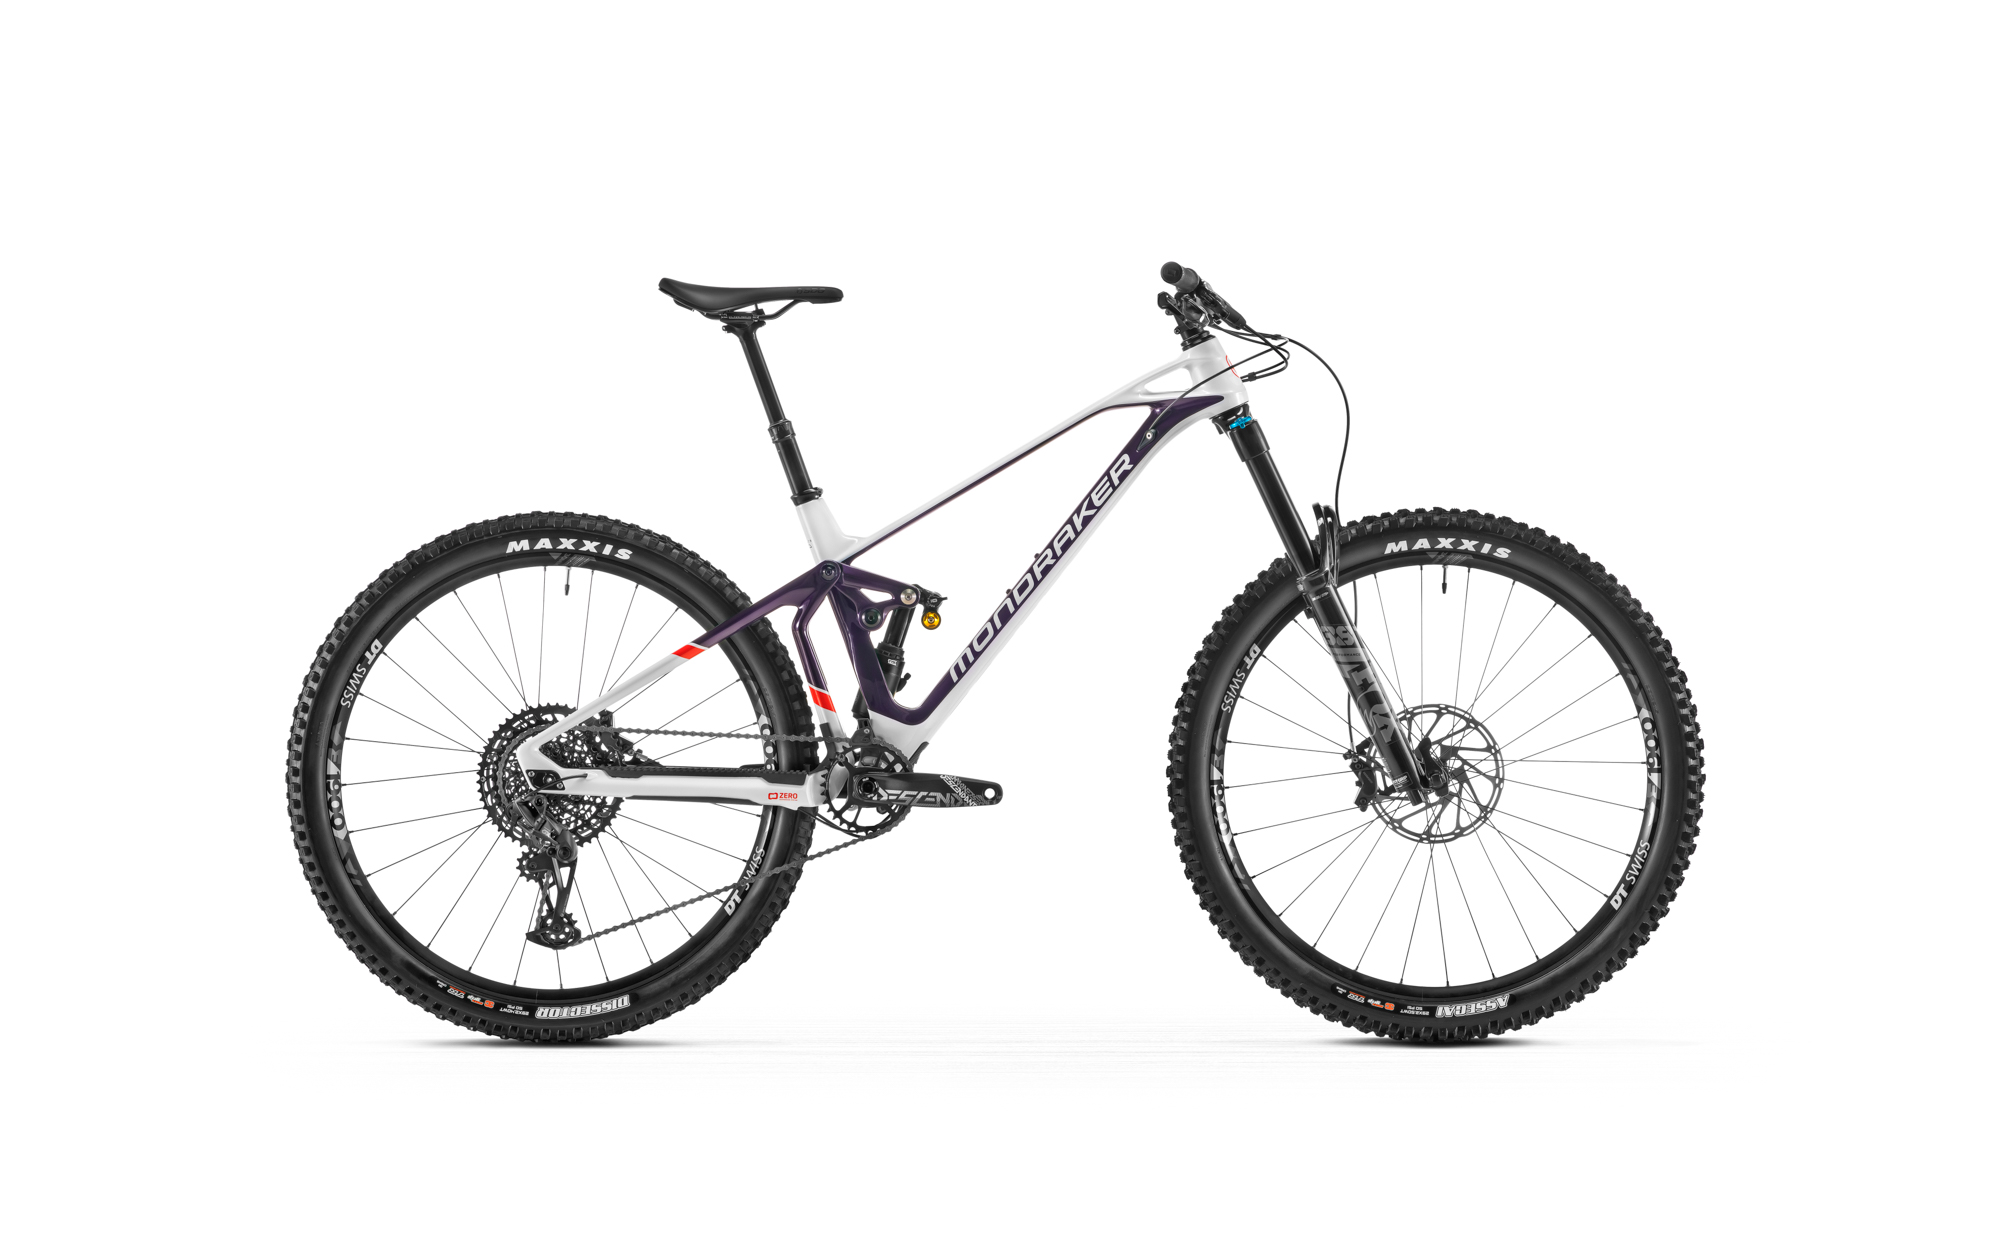 Superfoxy Carbon R, dirty white/deep purple/flame red, 2022